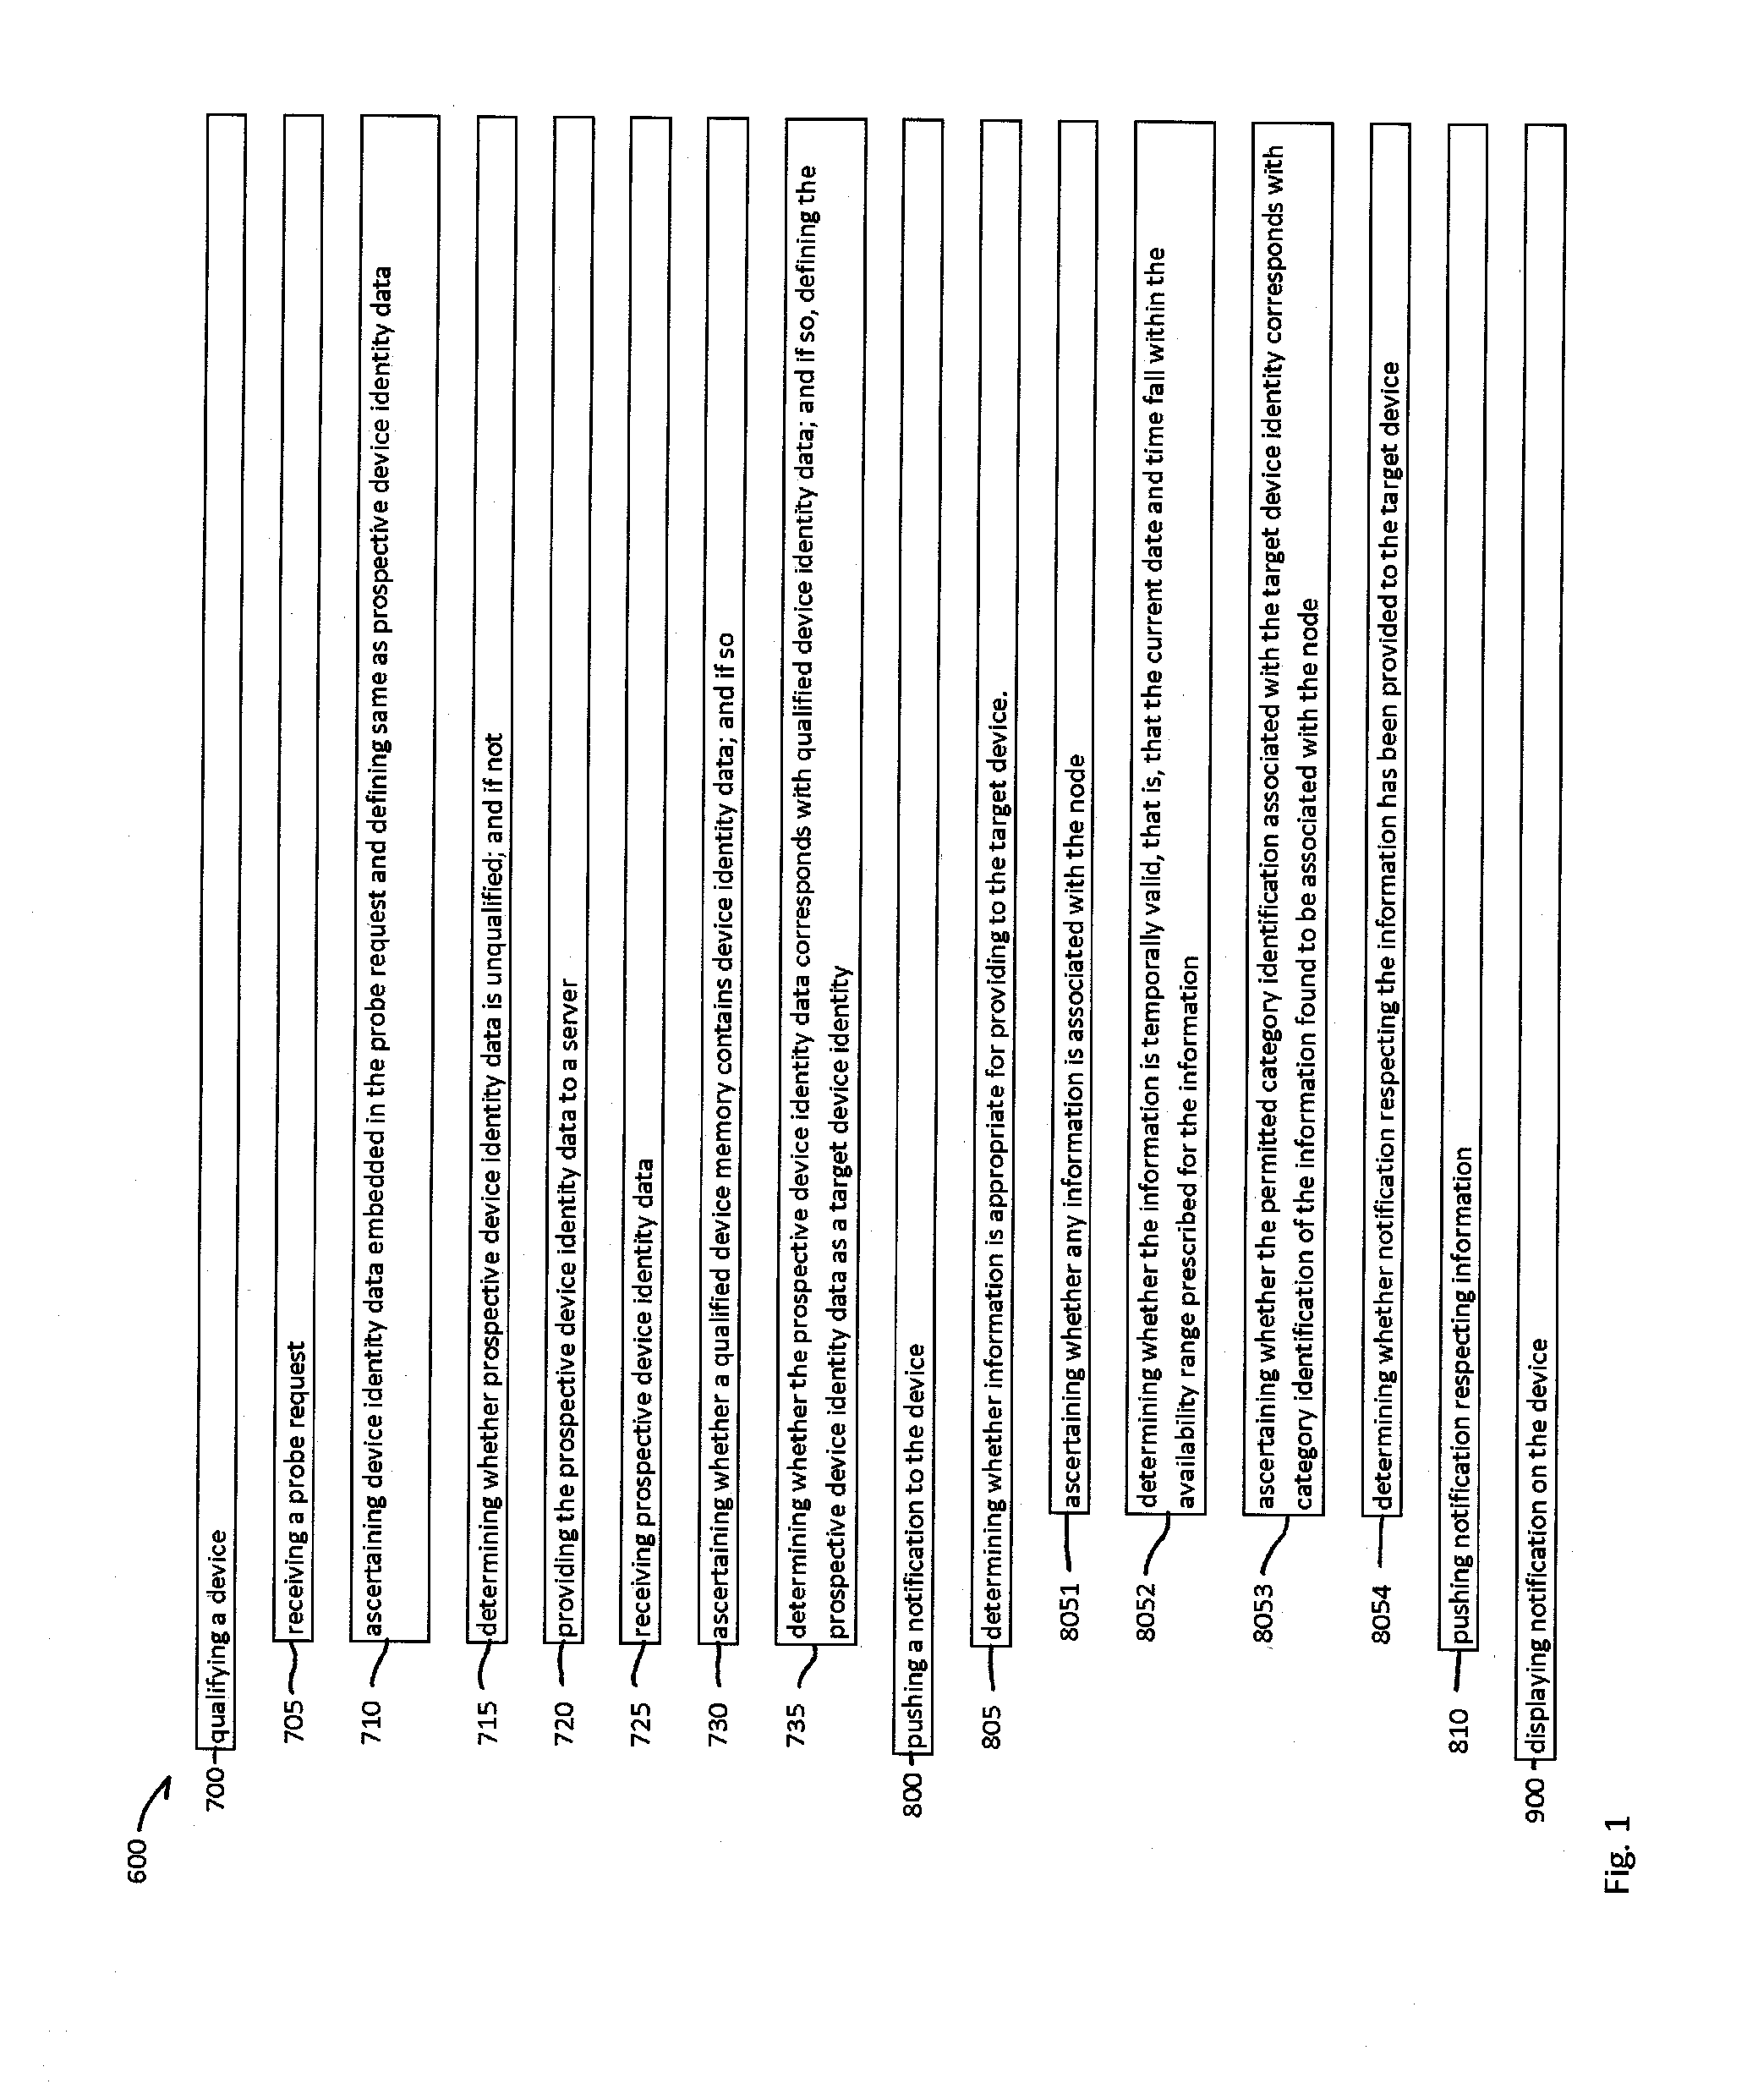 System, Method and Apparatuses for Qualifying Mobile Devices and Providing Information Thereto